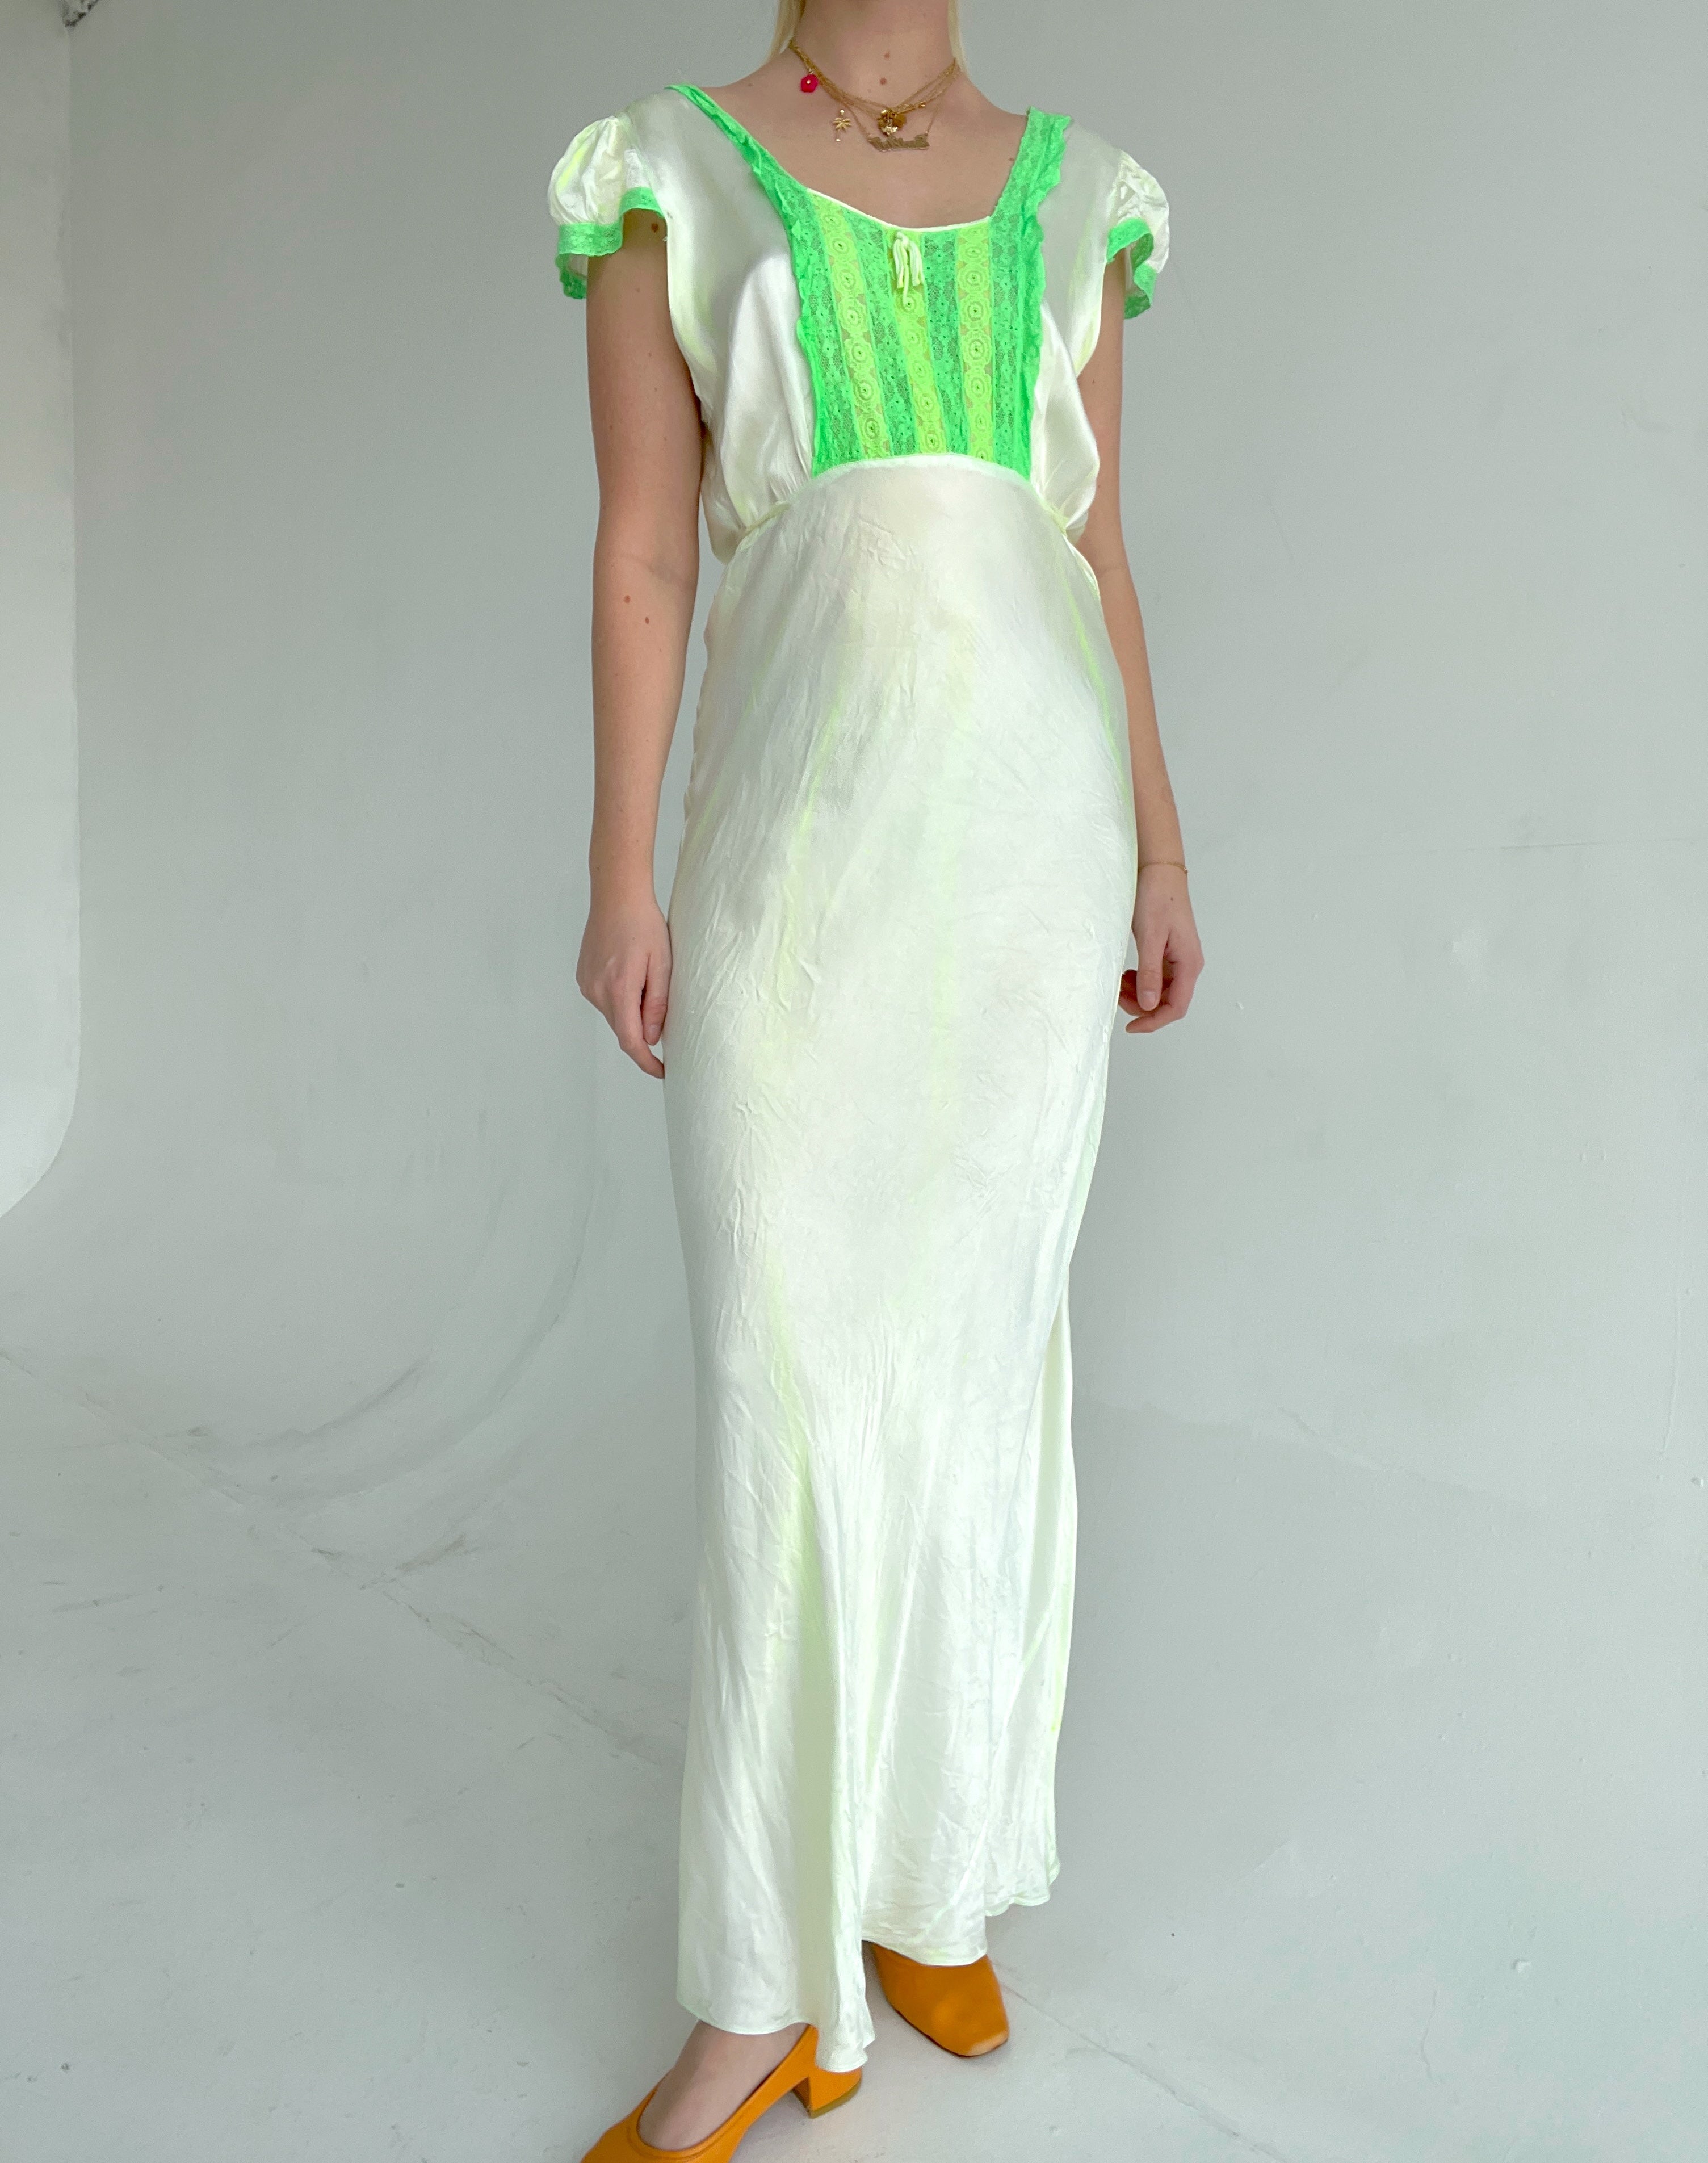 Hand Dyed Neon Green Satin Slip With Cap Sleeve